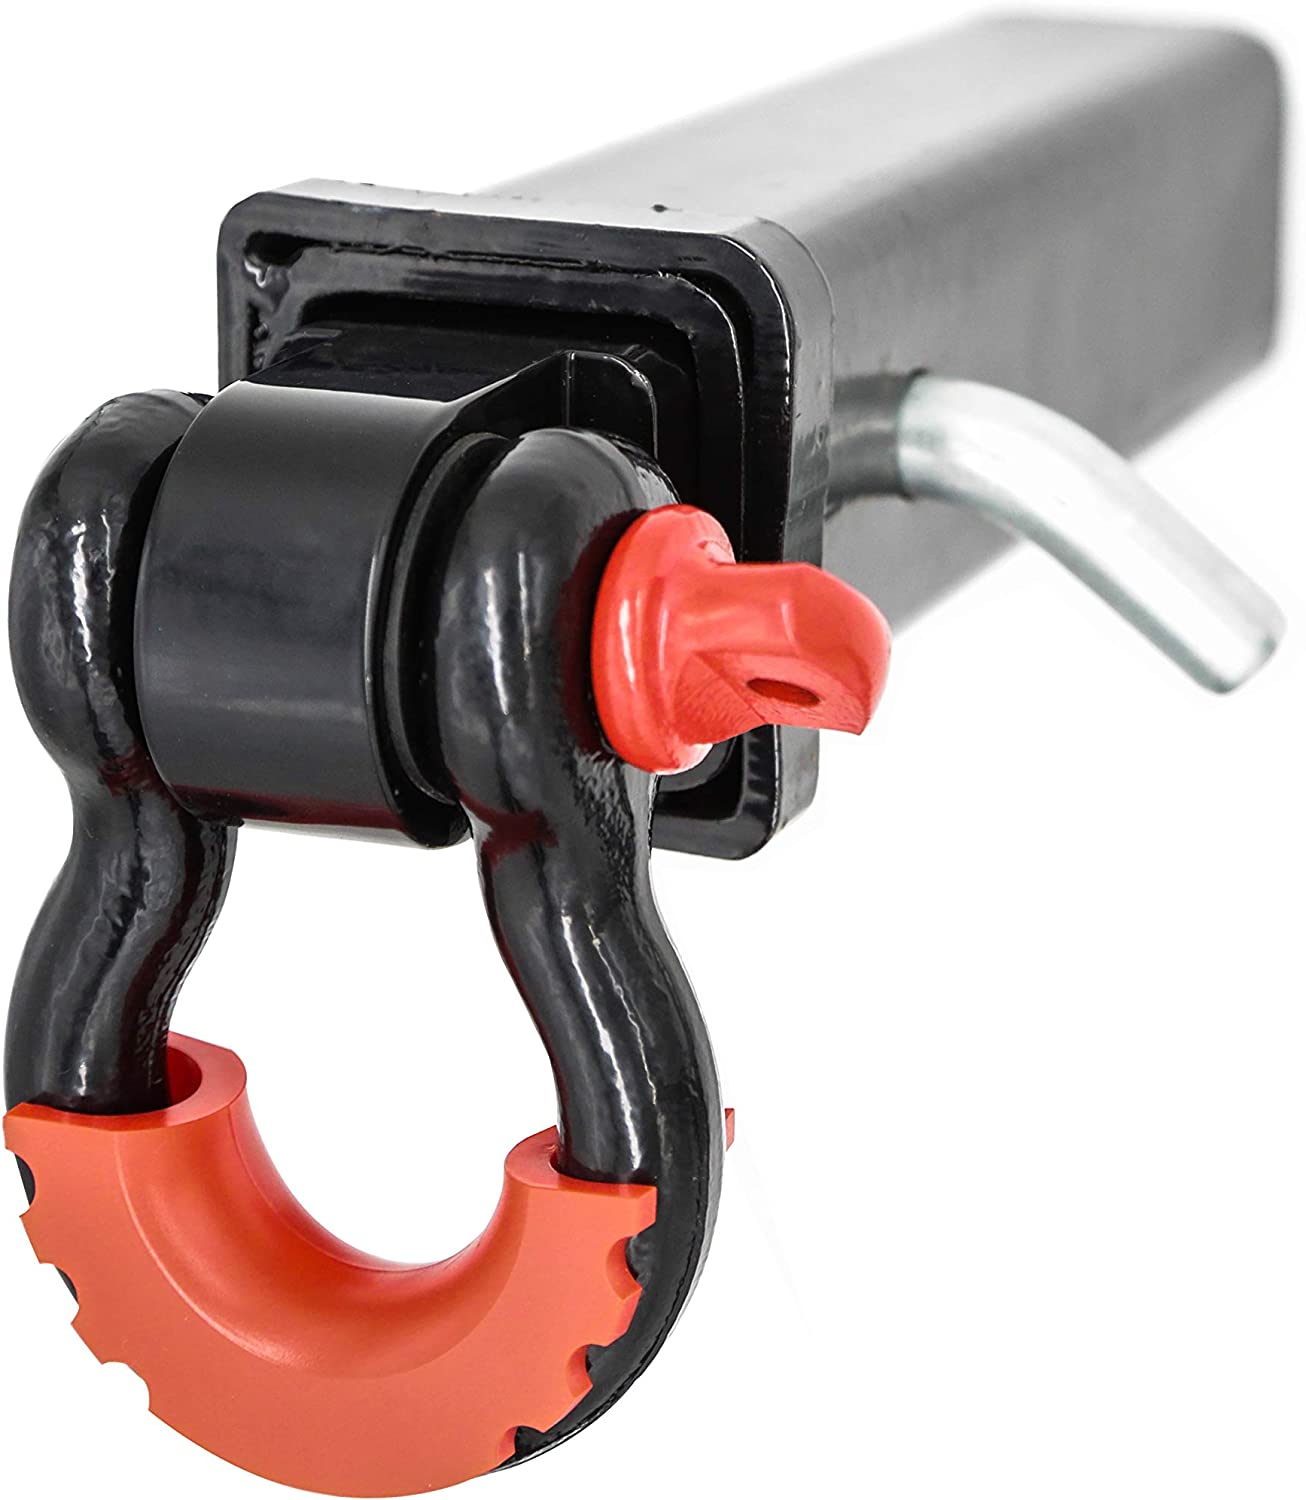 Forged Shackle Hitch Receiver w/ Isolator & Washers - 42,000 Lbs